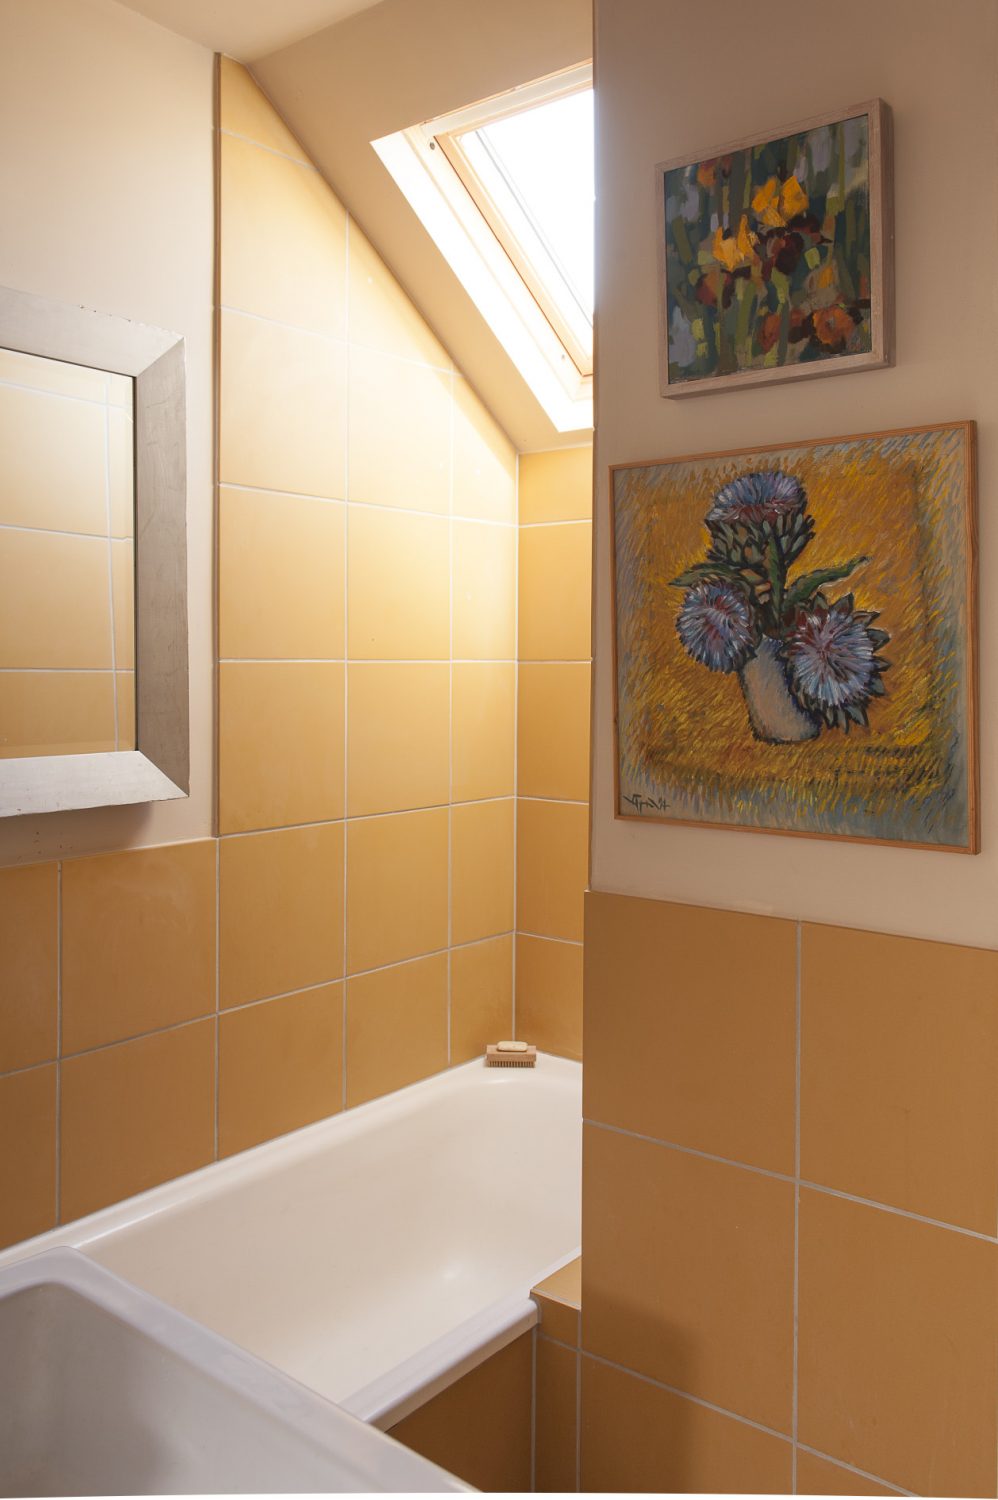 Francine used floor tiles from Fired Earth on the walls of her shower room